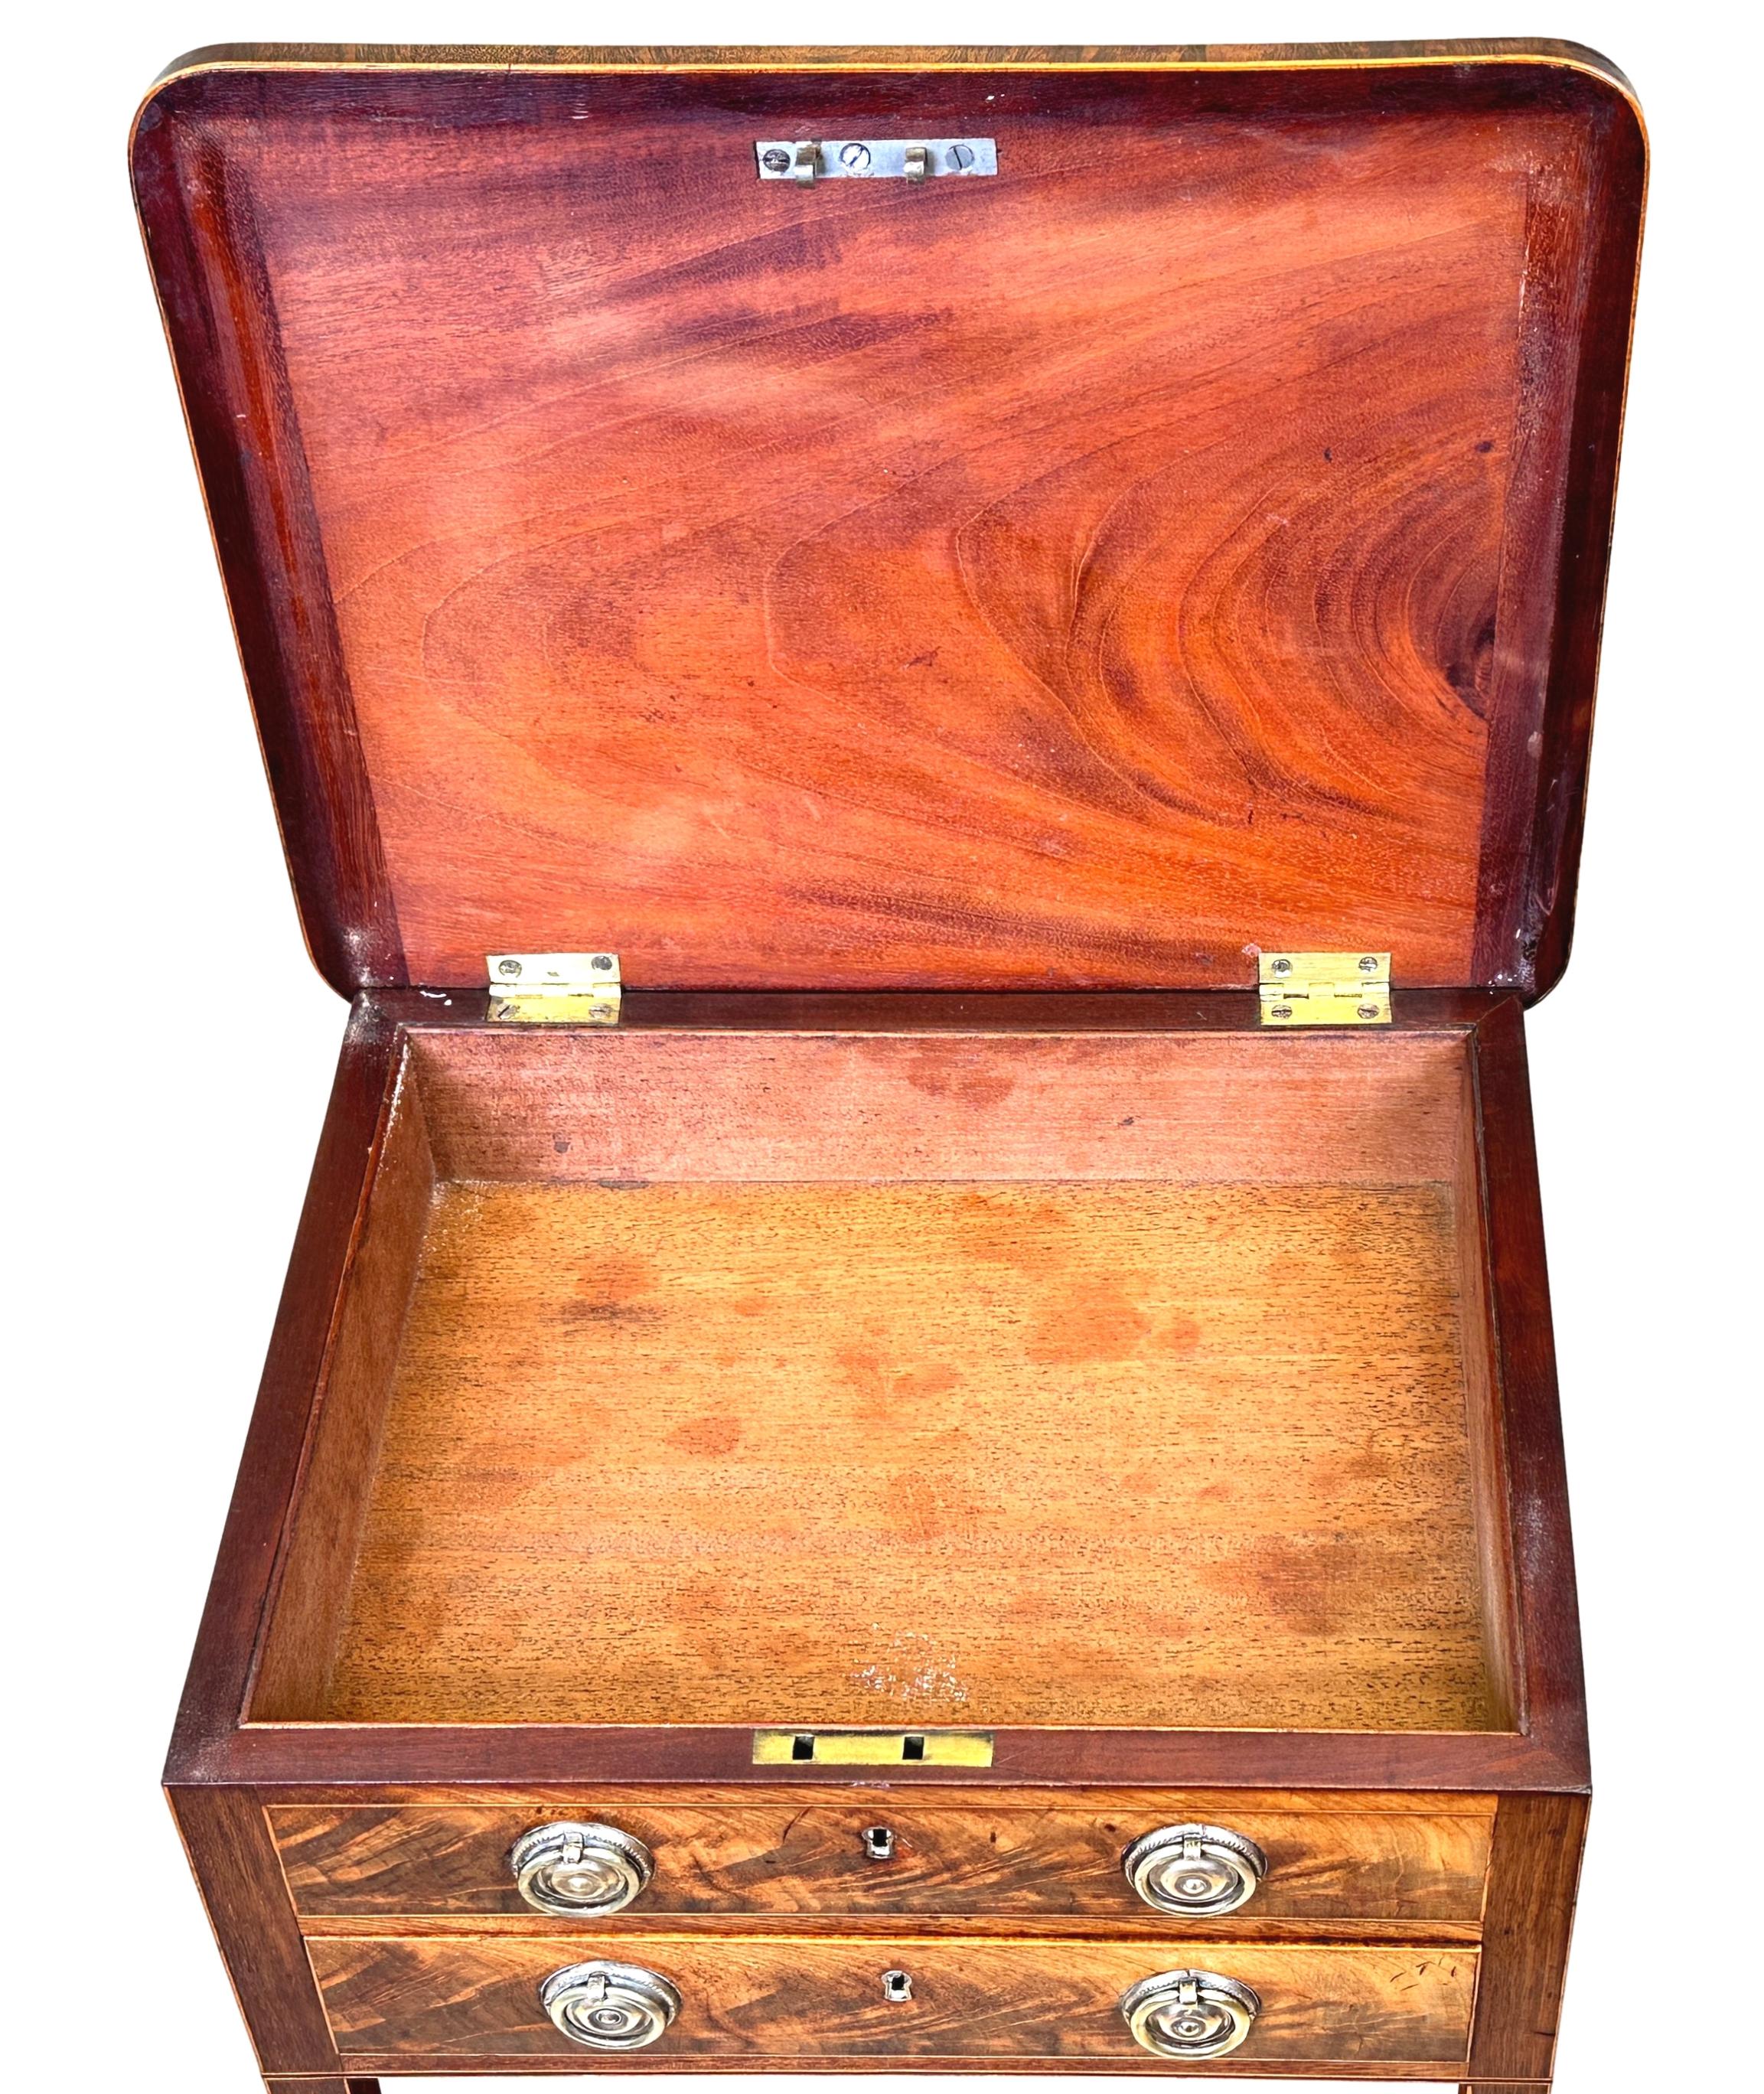 A Fine Quality Late 18th Century, Georgian, Sheraton Period, Mahogany Occasional Lamp Table, Having Rectangular Hinged Lift Up Lid Enclosing Storage Compartment, Over One False Drawer And One Actual Drawer With Fitted Divisions, Raised On Elegant